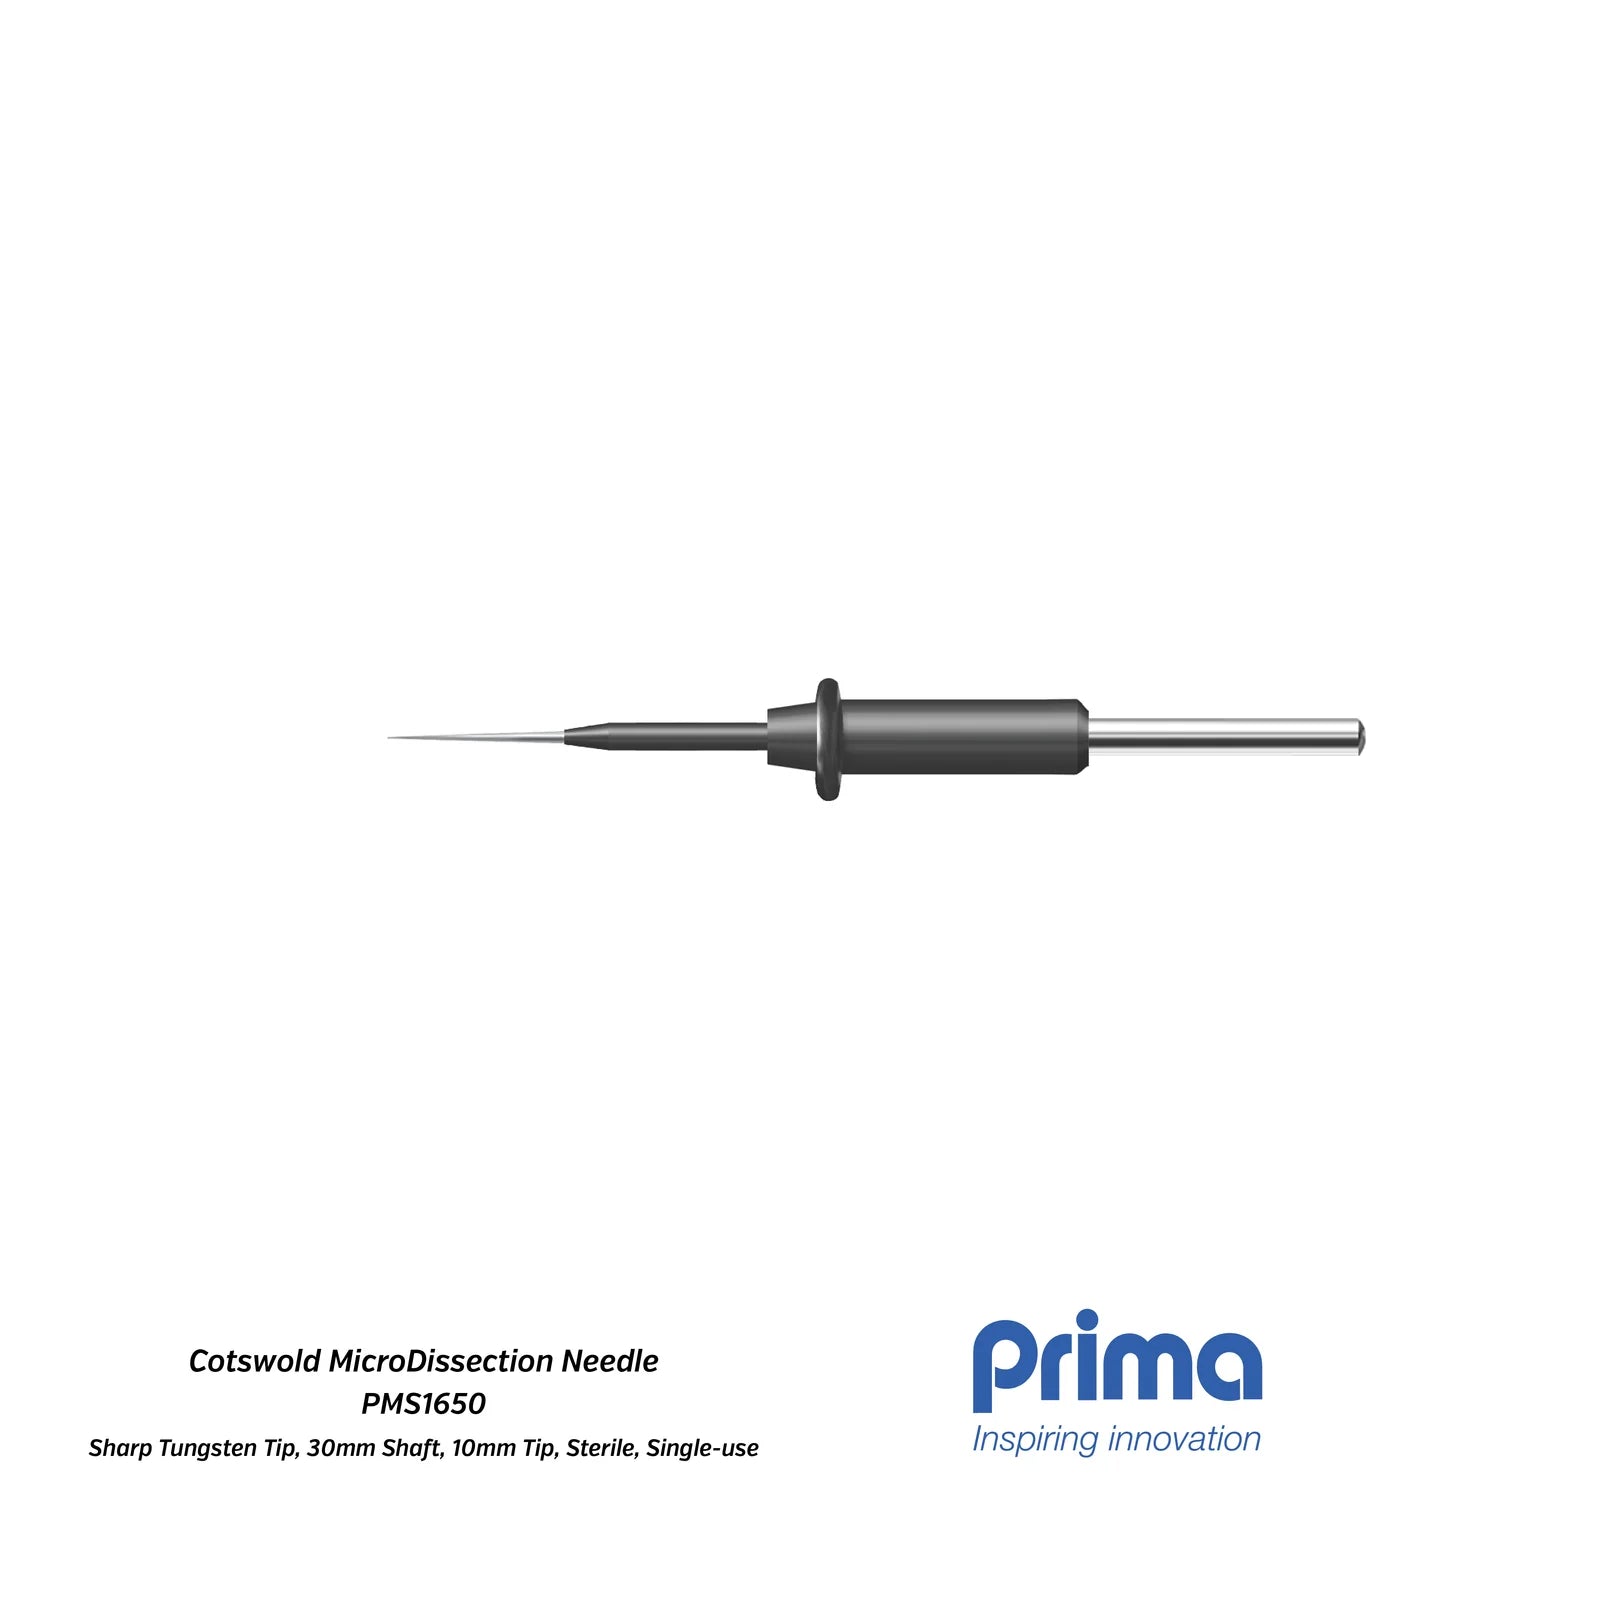 Cotswold Microdissection Needle (Sharp Tungsten Tip, 30mm Shaft with 10mm Tip)